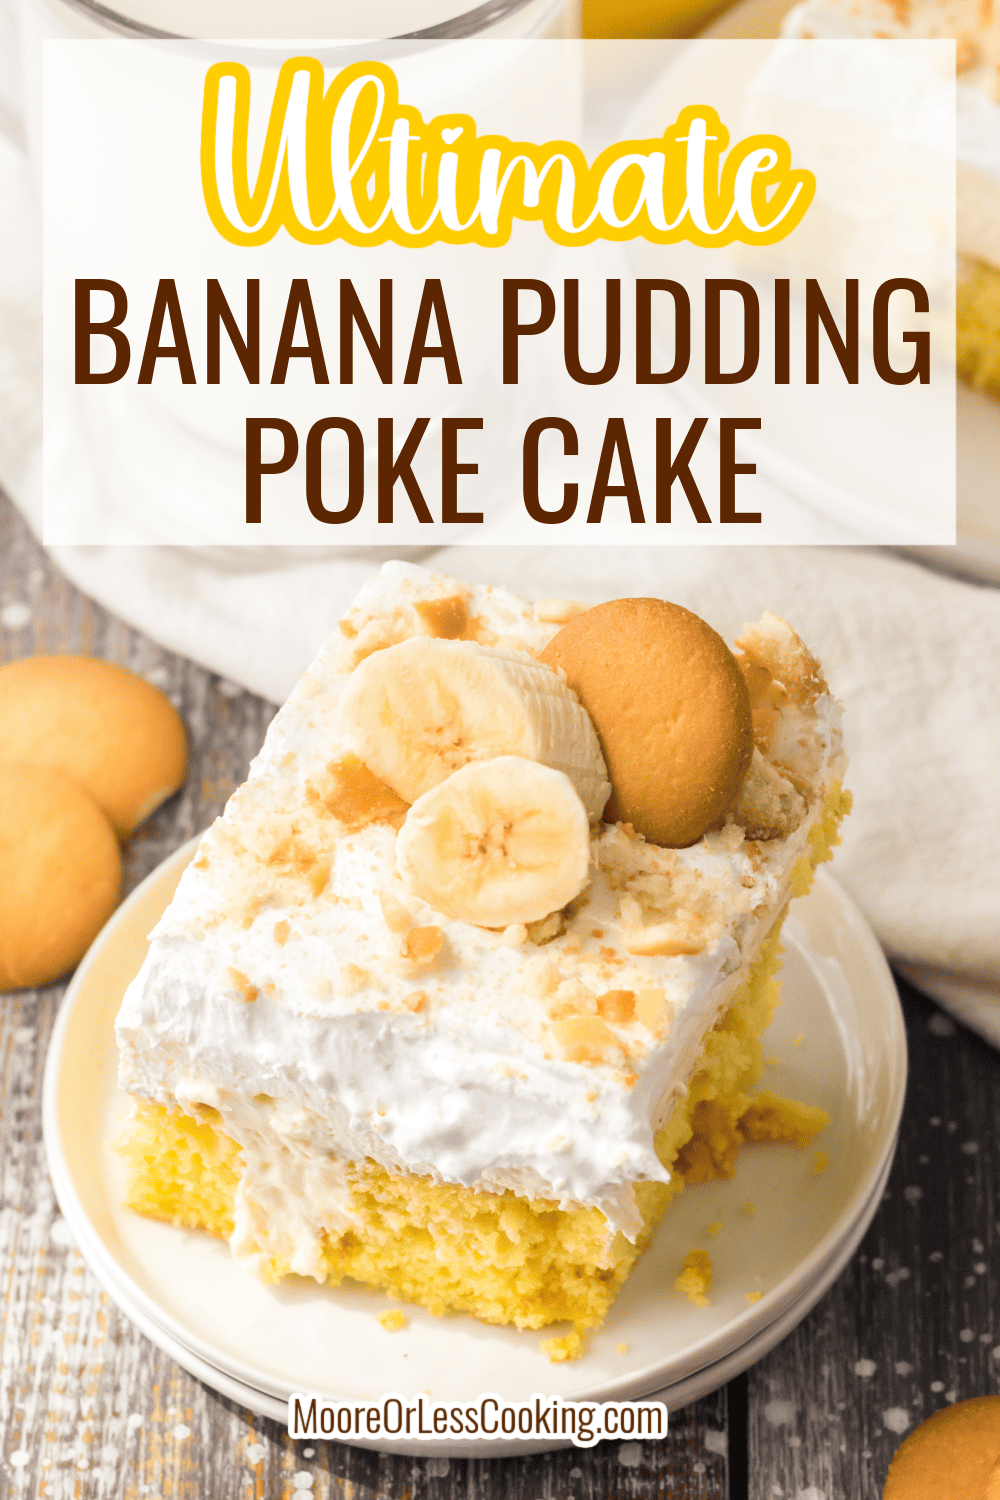 Combine the tastes of banana cream pie and banana pudding into an easy-to-make Banana Pudding Poke Cake. It's a dessert that's soaked with deliciously rich and creamy banana flavor and topped with a whipped cream and 'nilla wafer crumb topping. It's banana bliss in each bite! via @Mooreorlesscook